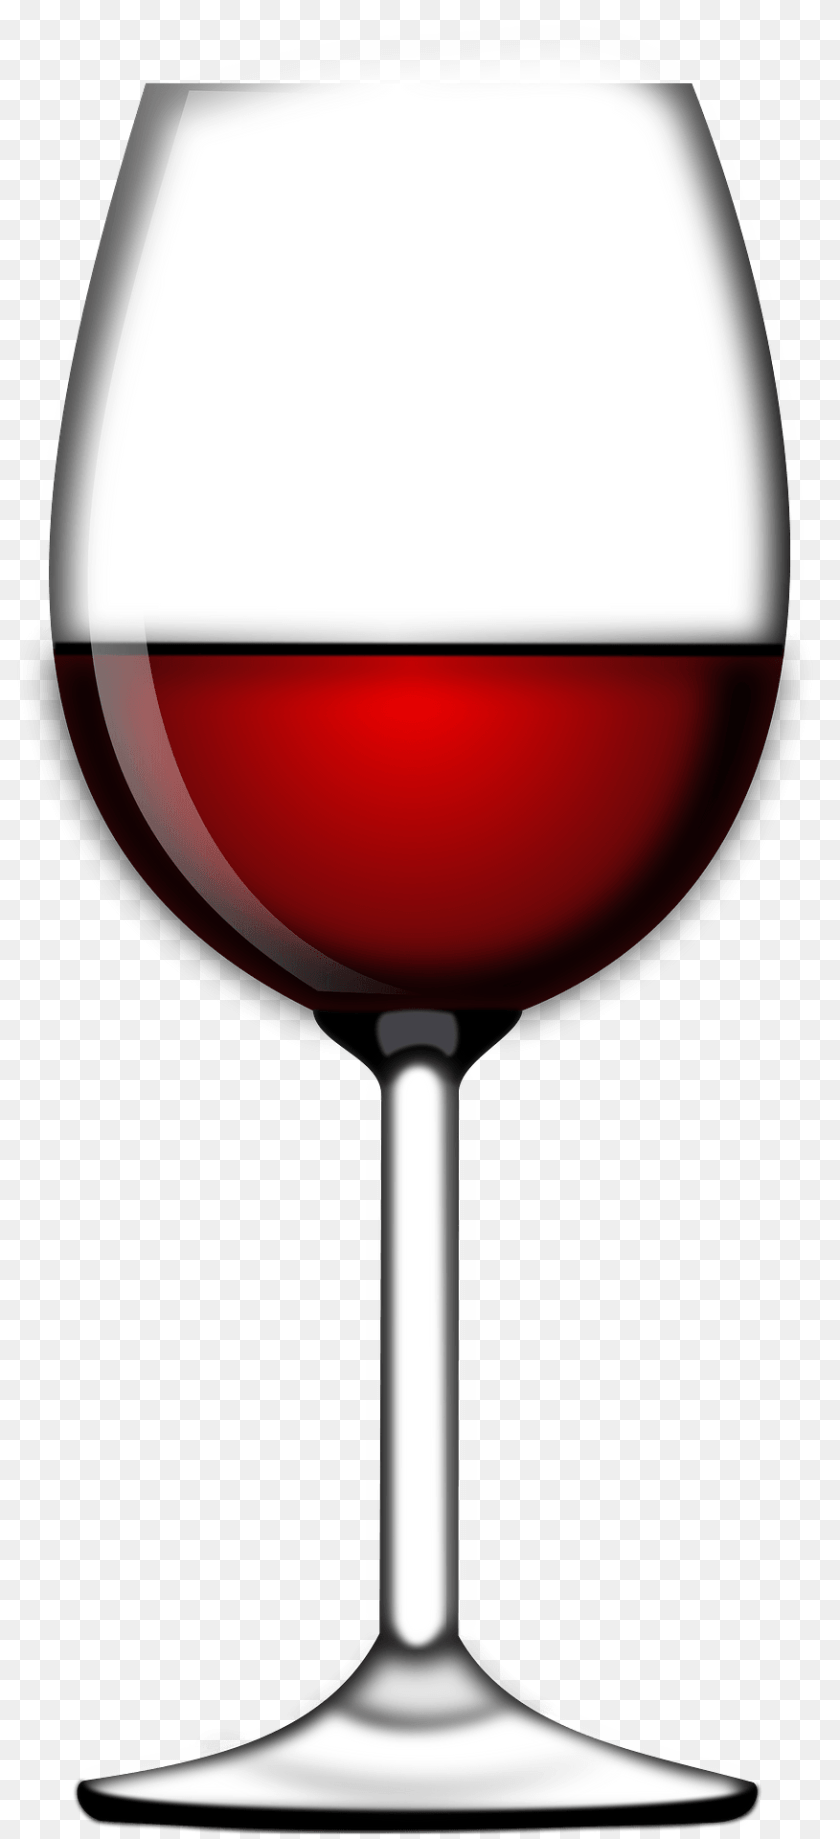 877x1920 Glass Of Wine Clipart, Alcohol, Red Wine, Liquor, Wine Glass PNG